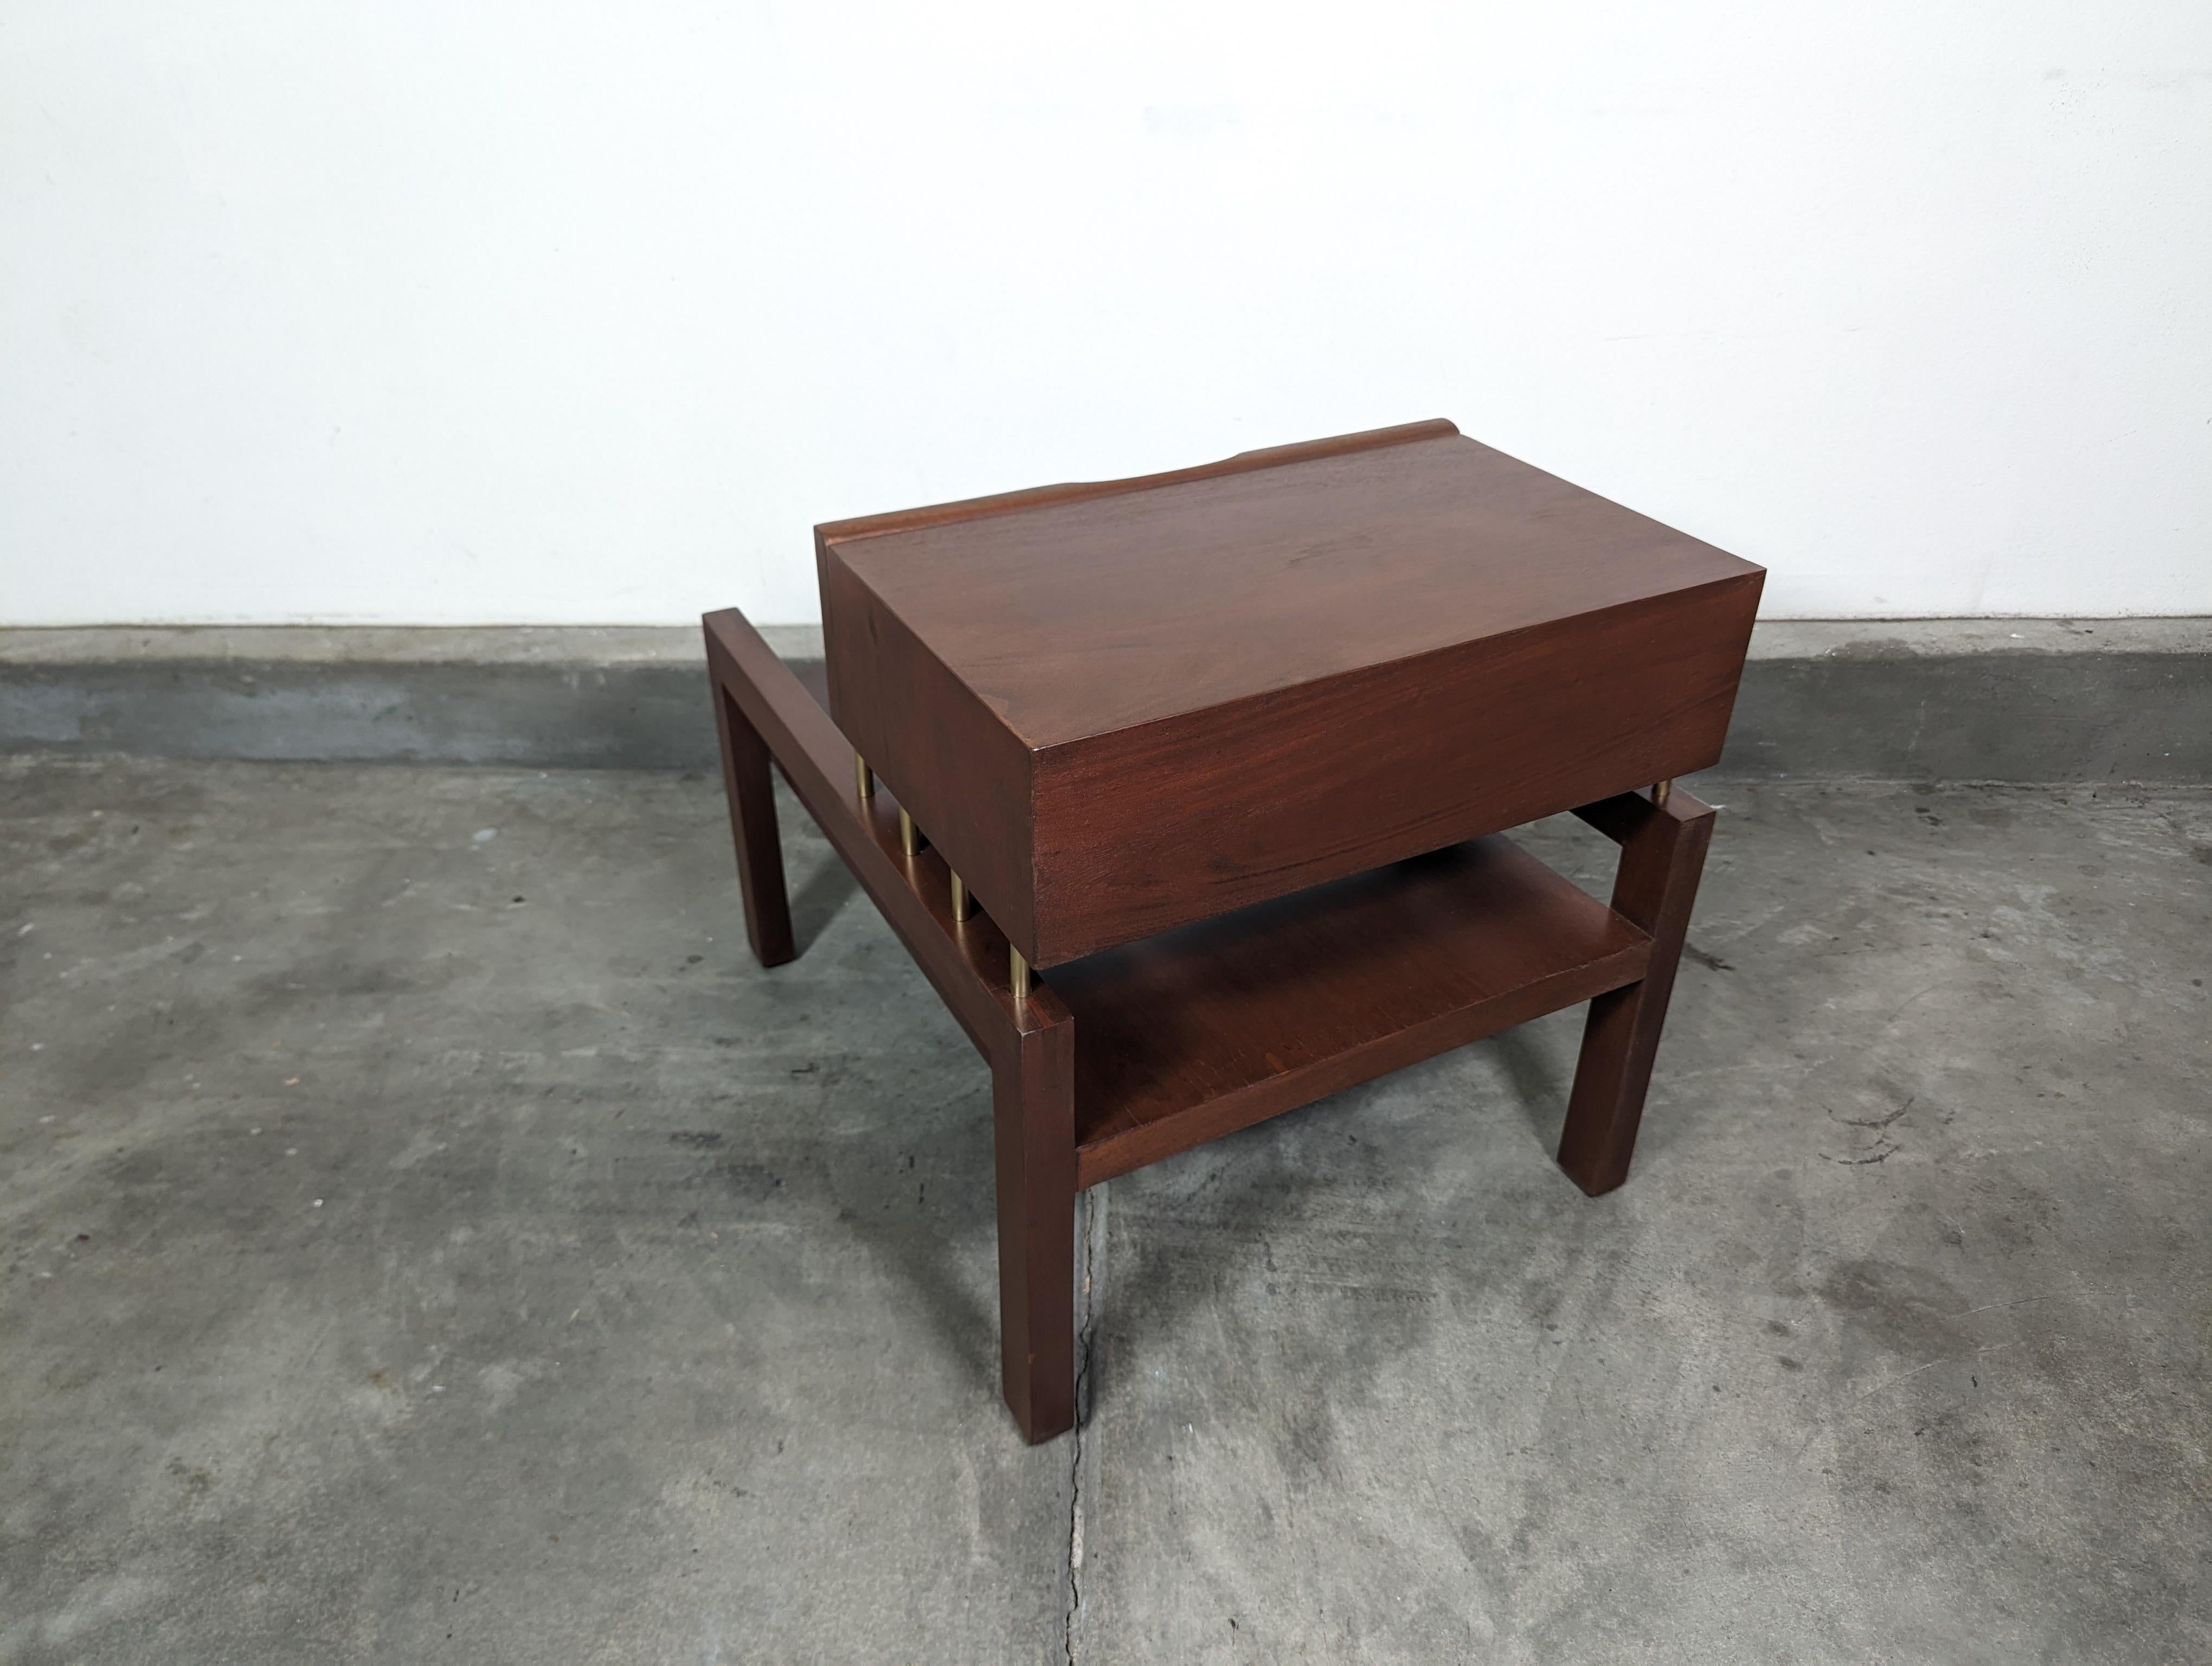 Mid Century Modern End Table by Edmond J. Spence for Industria Mueblera, c1950s For Sale 4